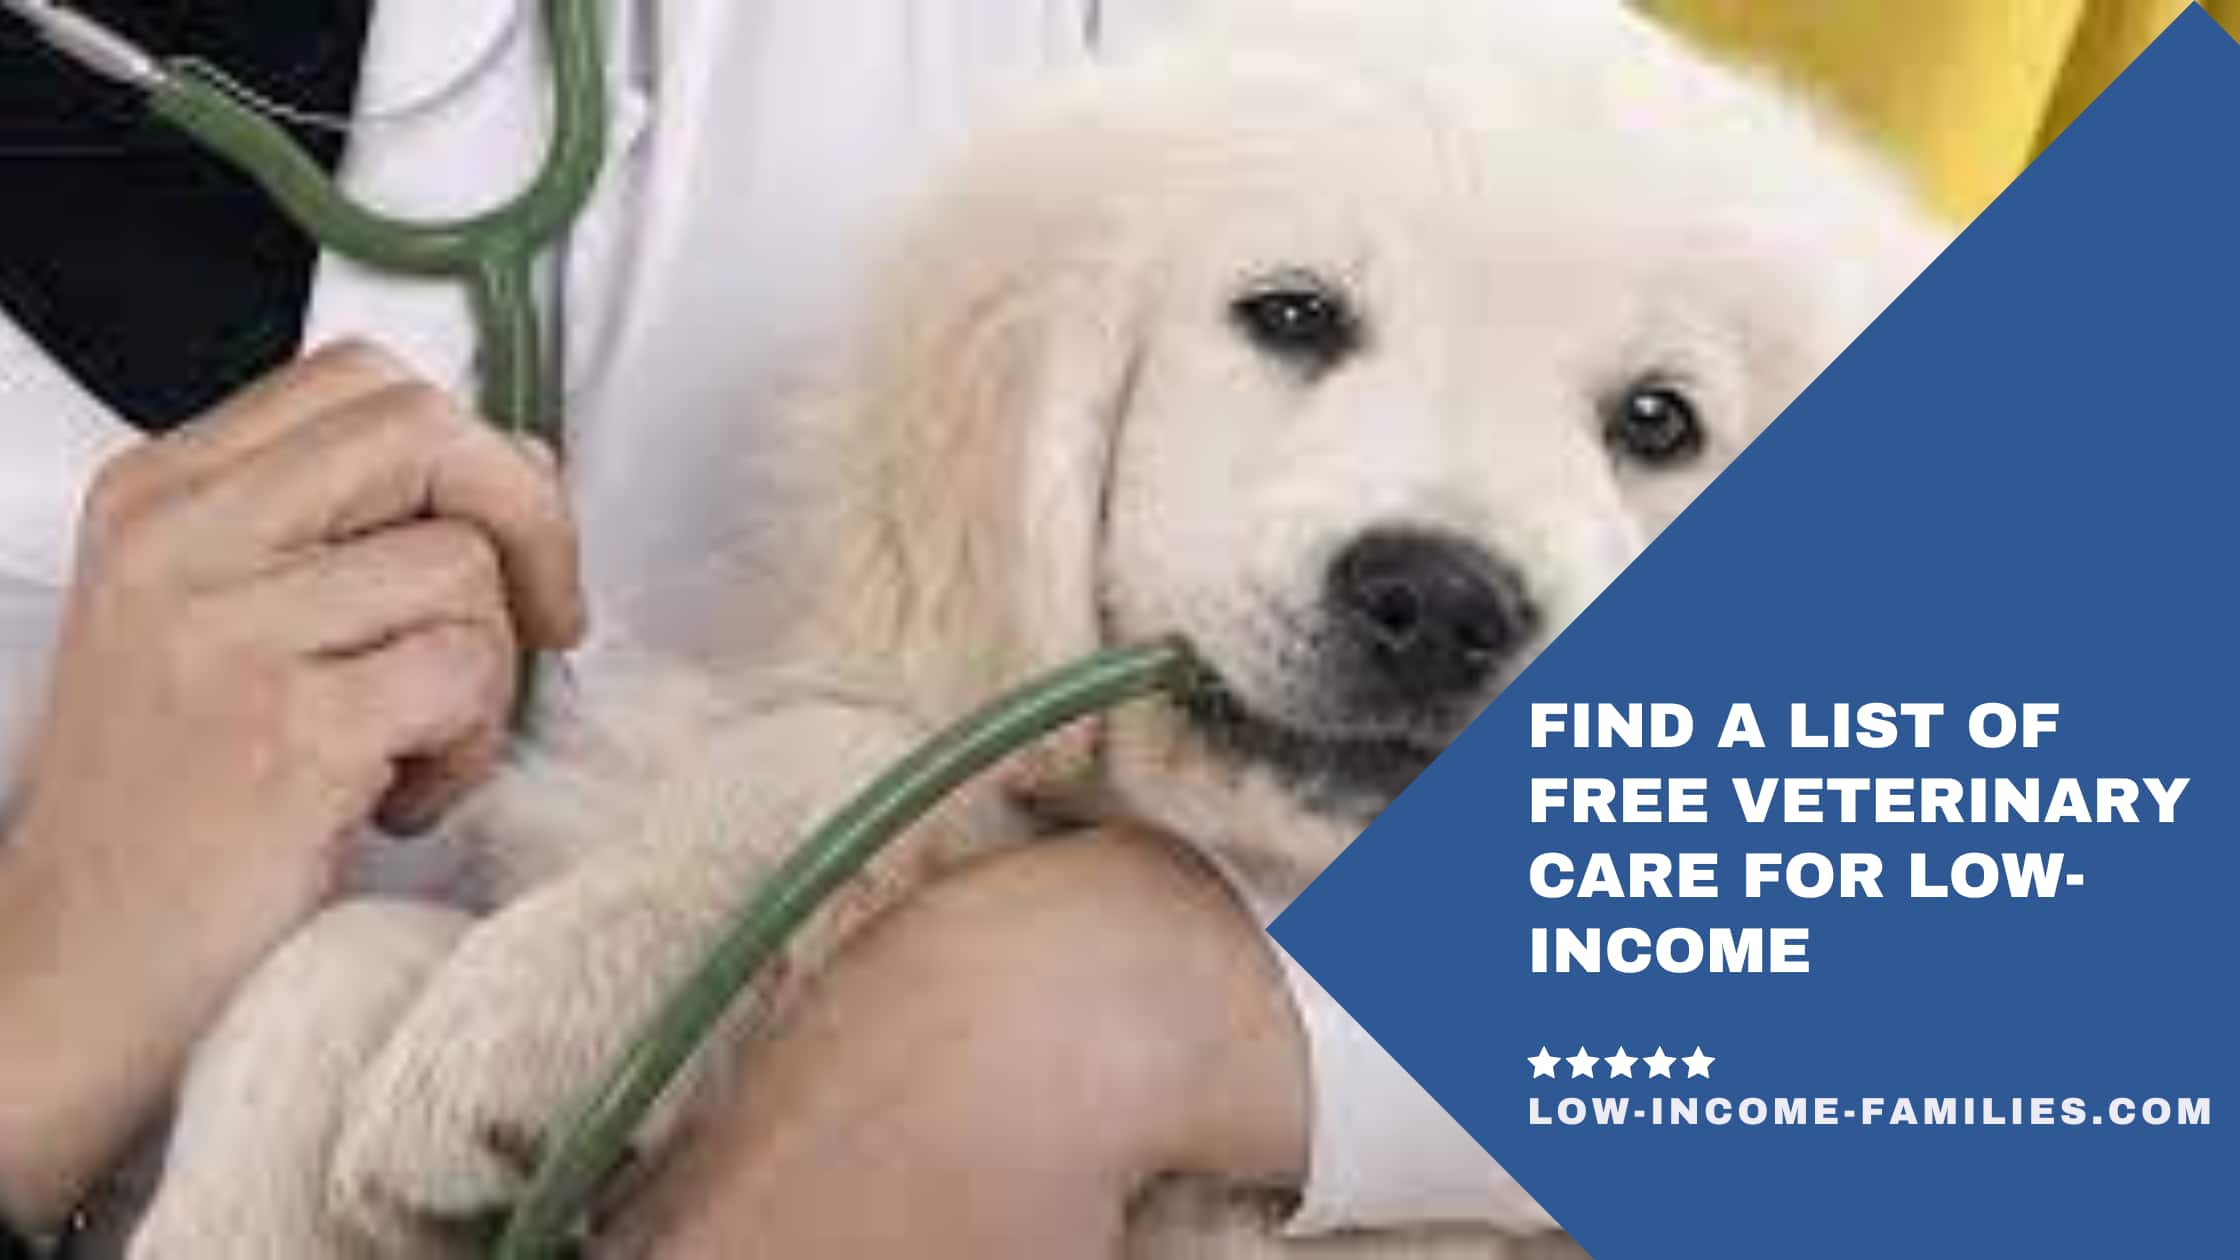 Find a List of Free Veterinary Care for Low-Income